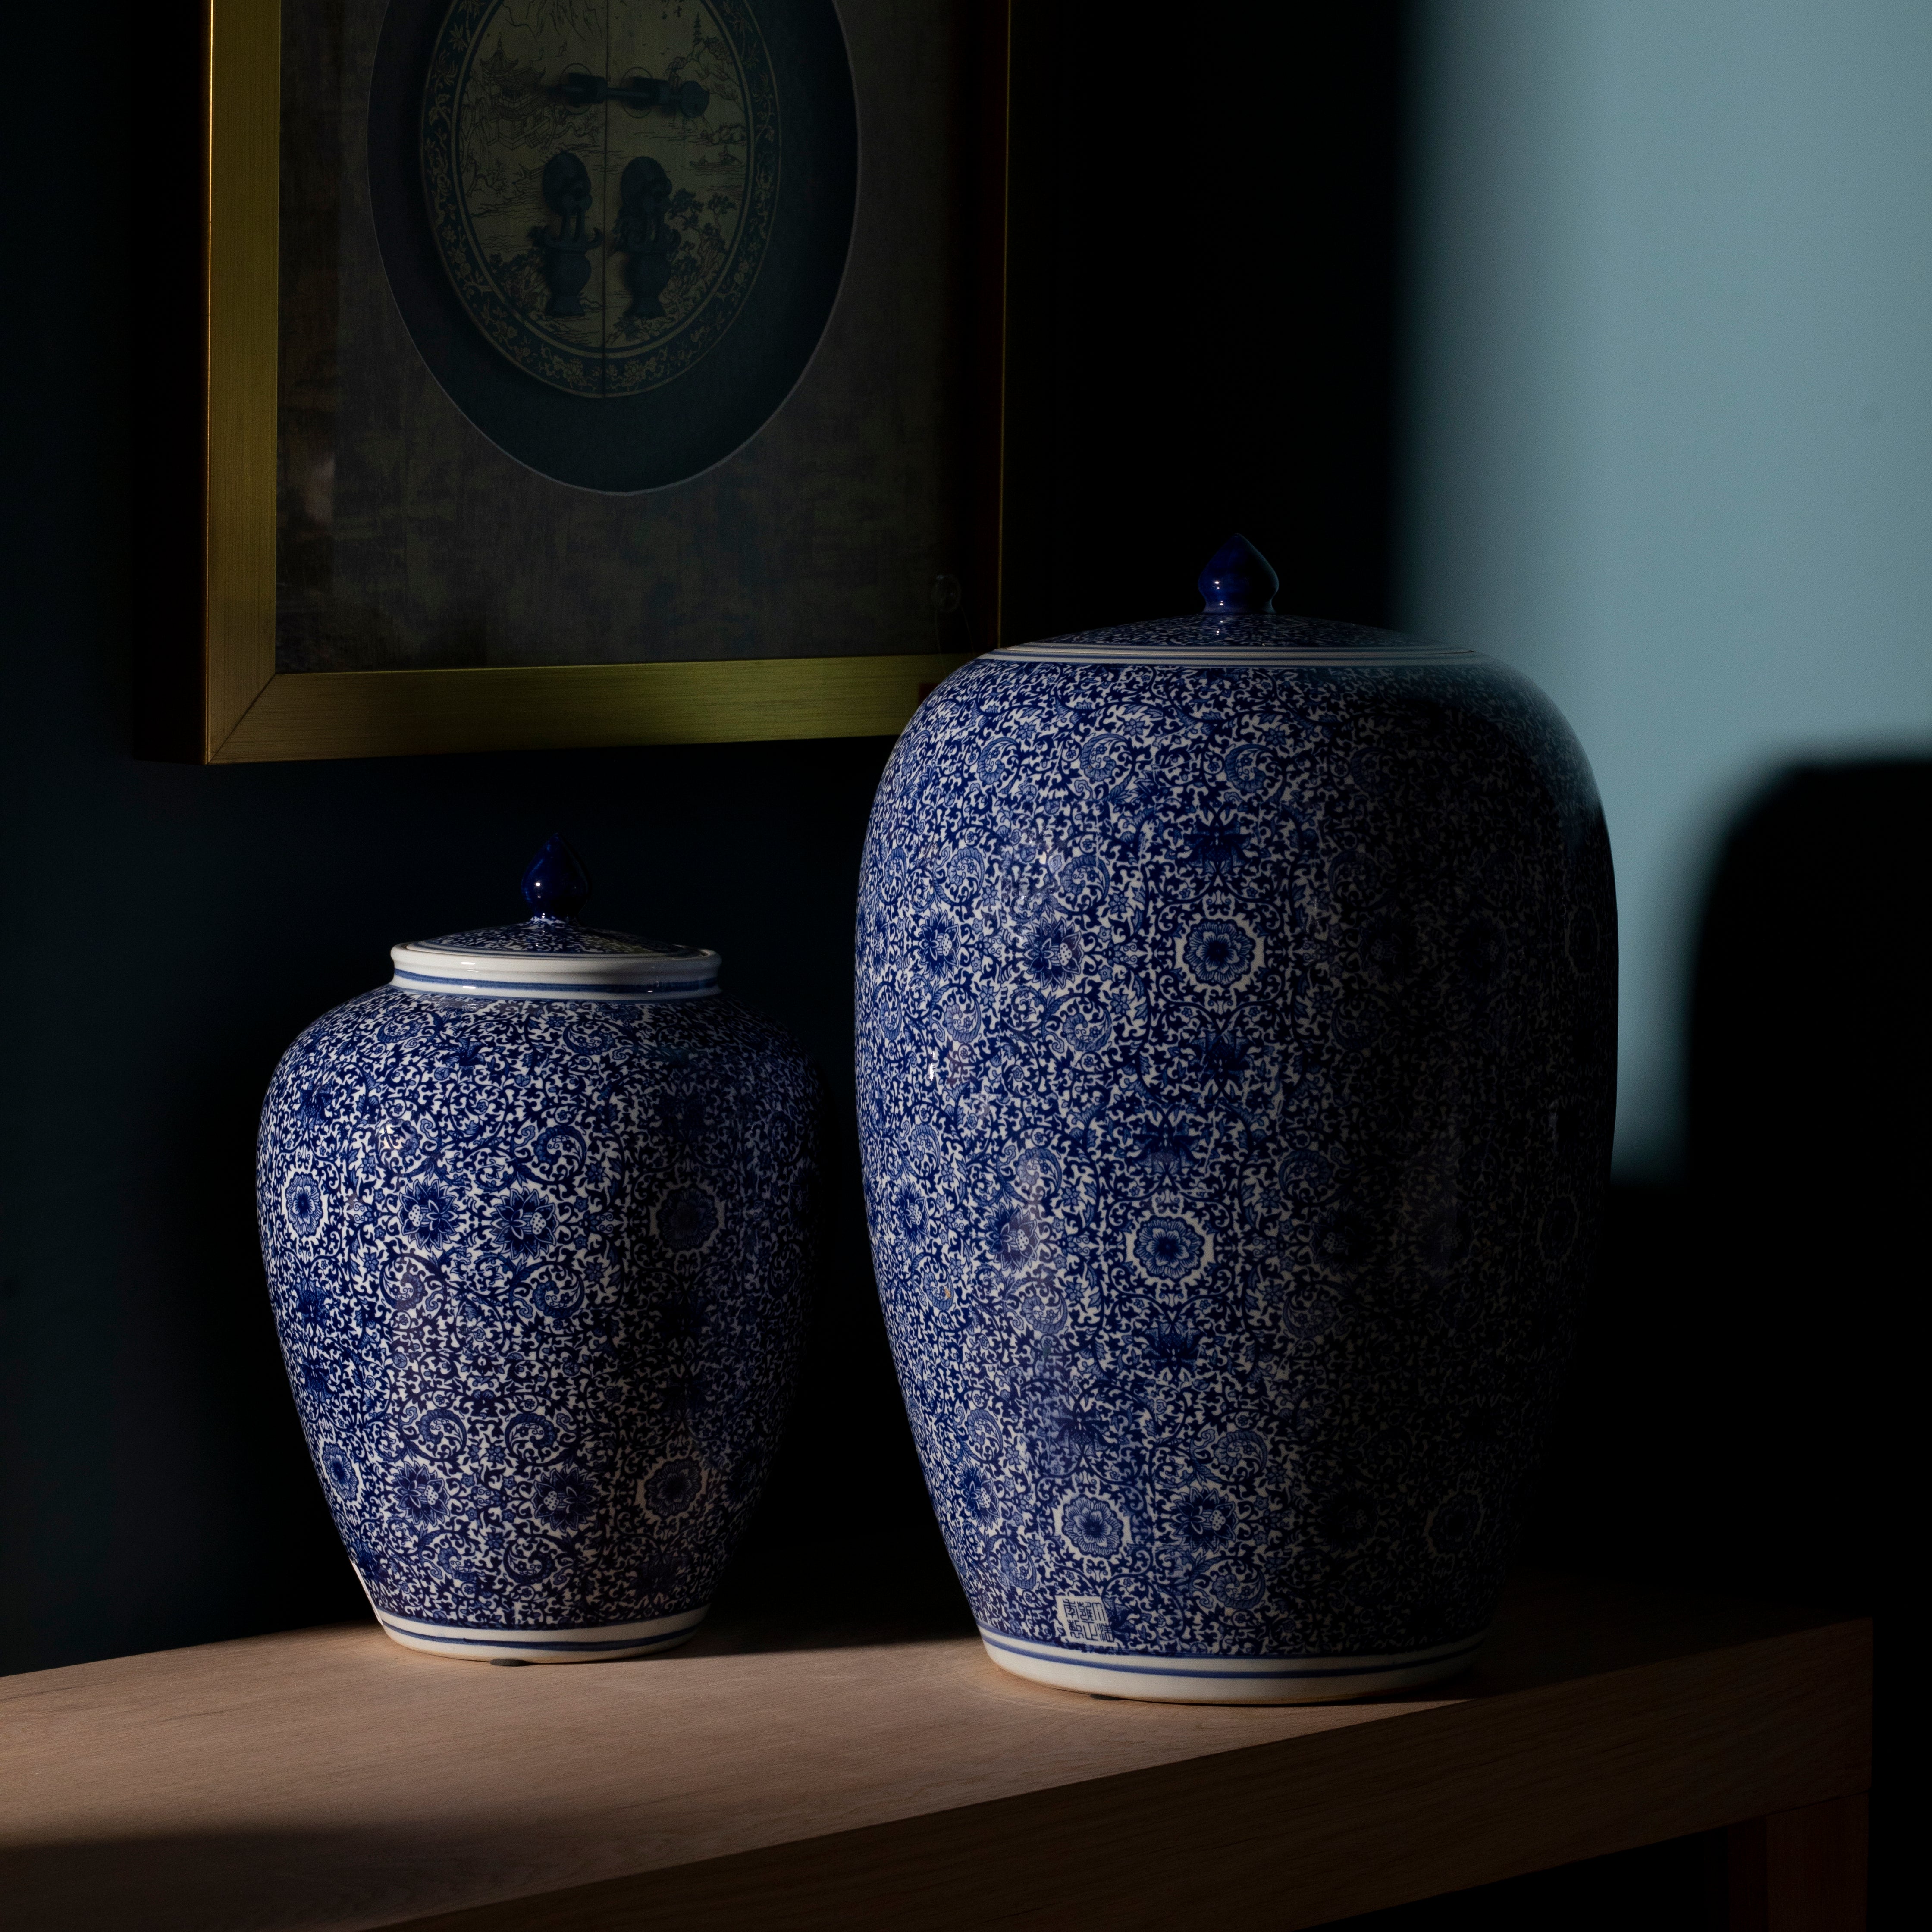 Set/2 Sung Porcelain Pots, Lusitanus Home Collection by Legend of Asia.

Real chinese porcelain waterproof pots with lids in white and dark blue, produced by hand with traditional methods. The longtime relationship between Portugal and Macau is